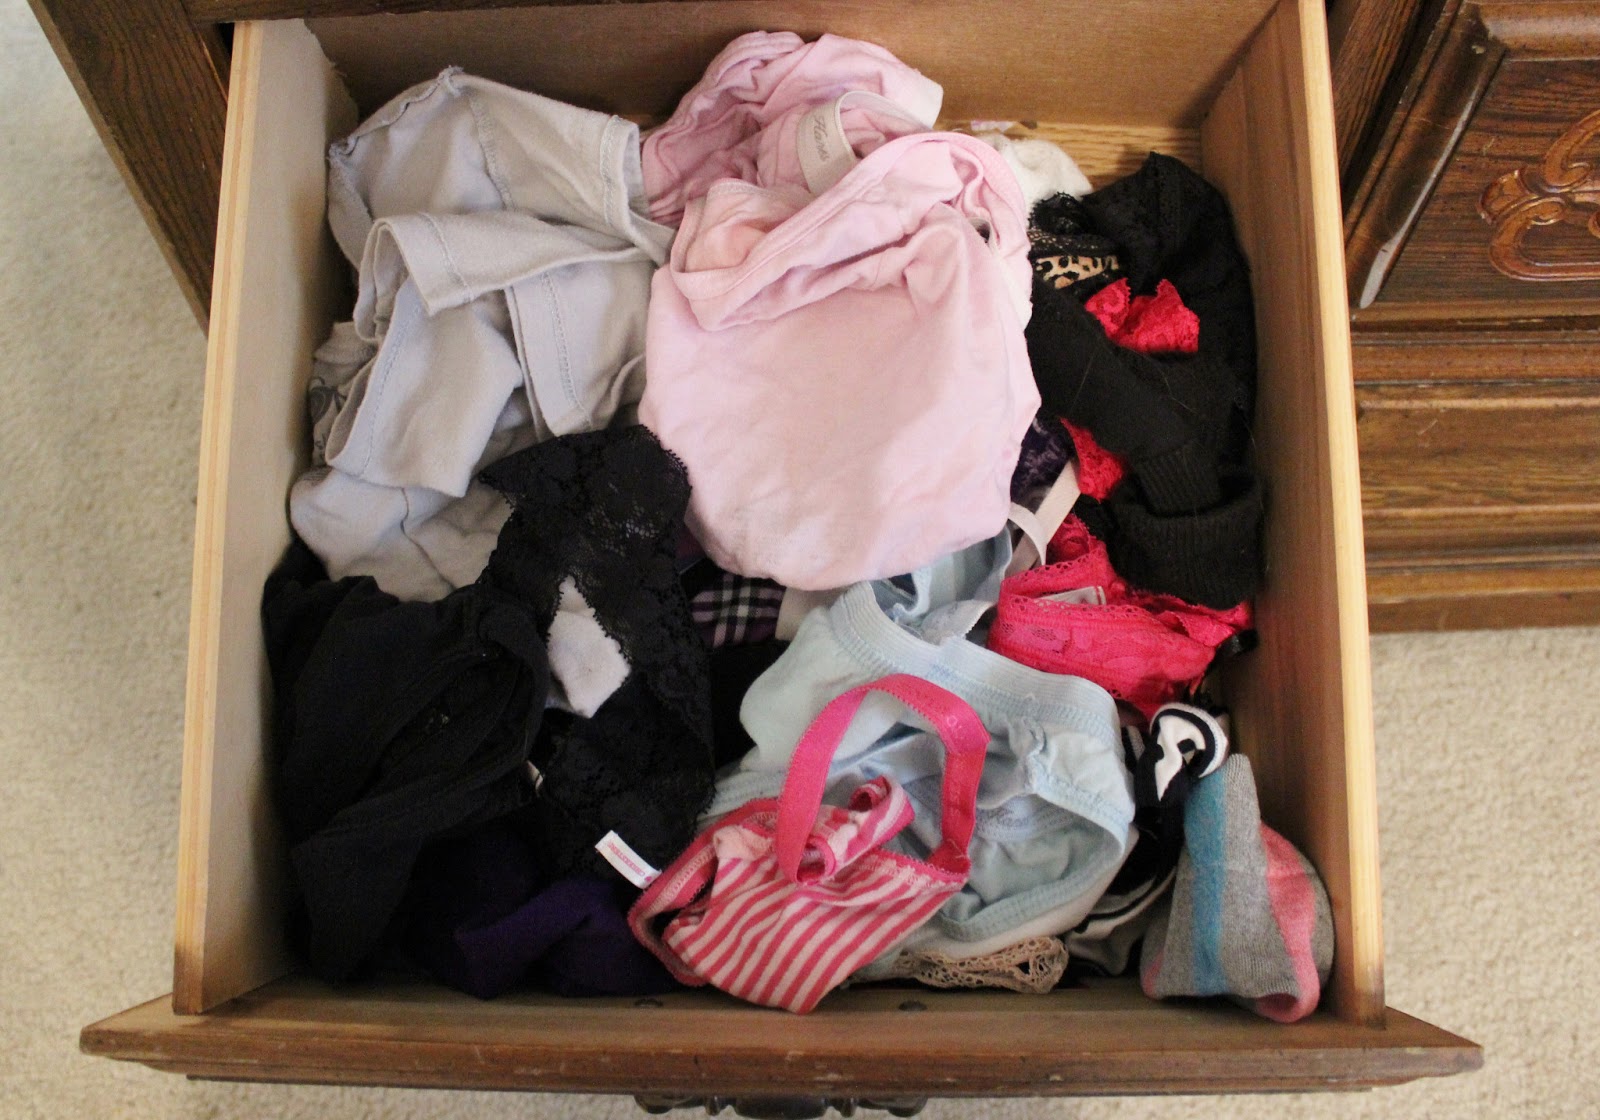 Lovely On a Budget: ORGANIZING: SOCK DRAWER